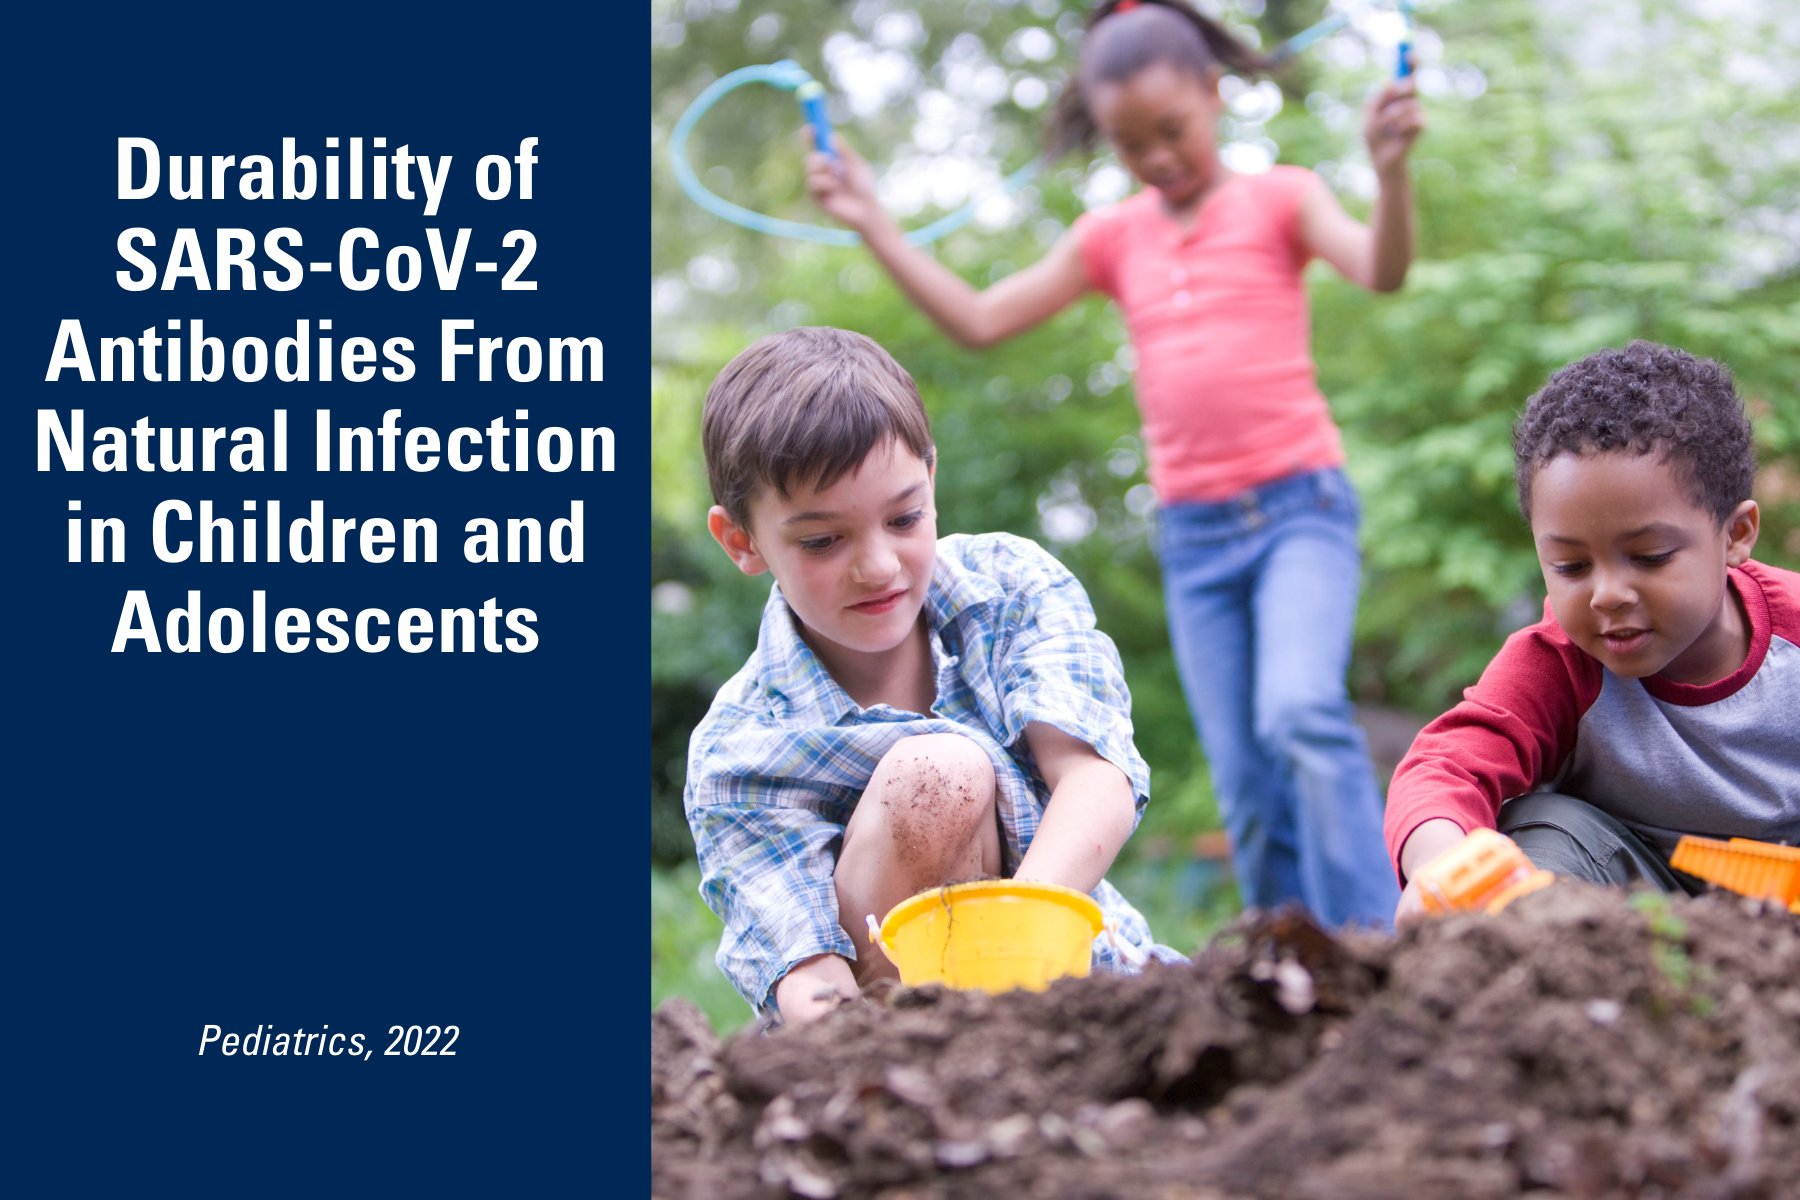 Durability of SARS-CoV-2 Antibodies From Natural Infection in Children and Adolescents